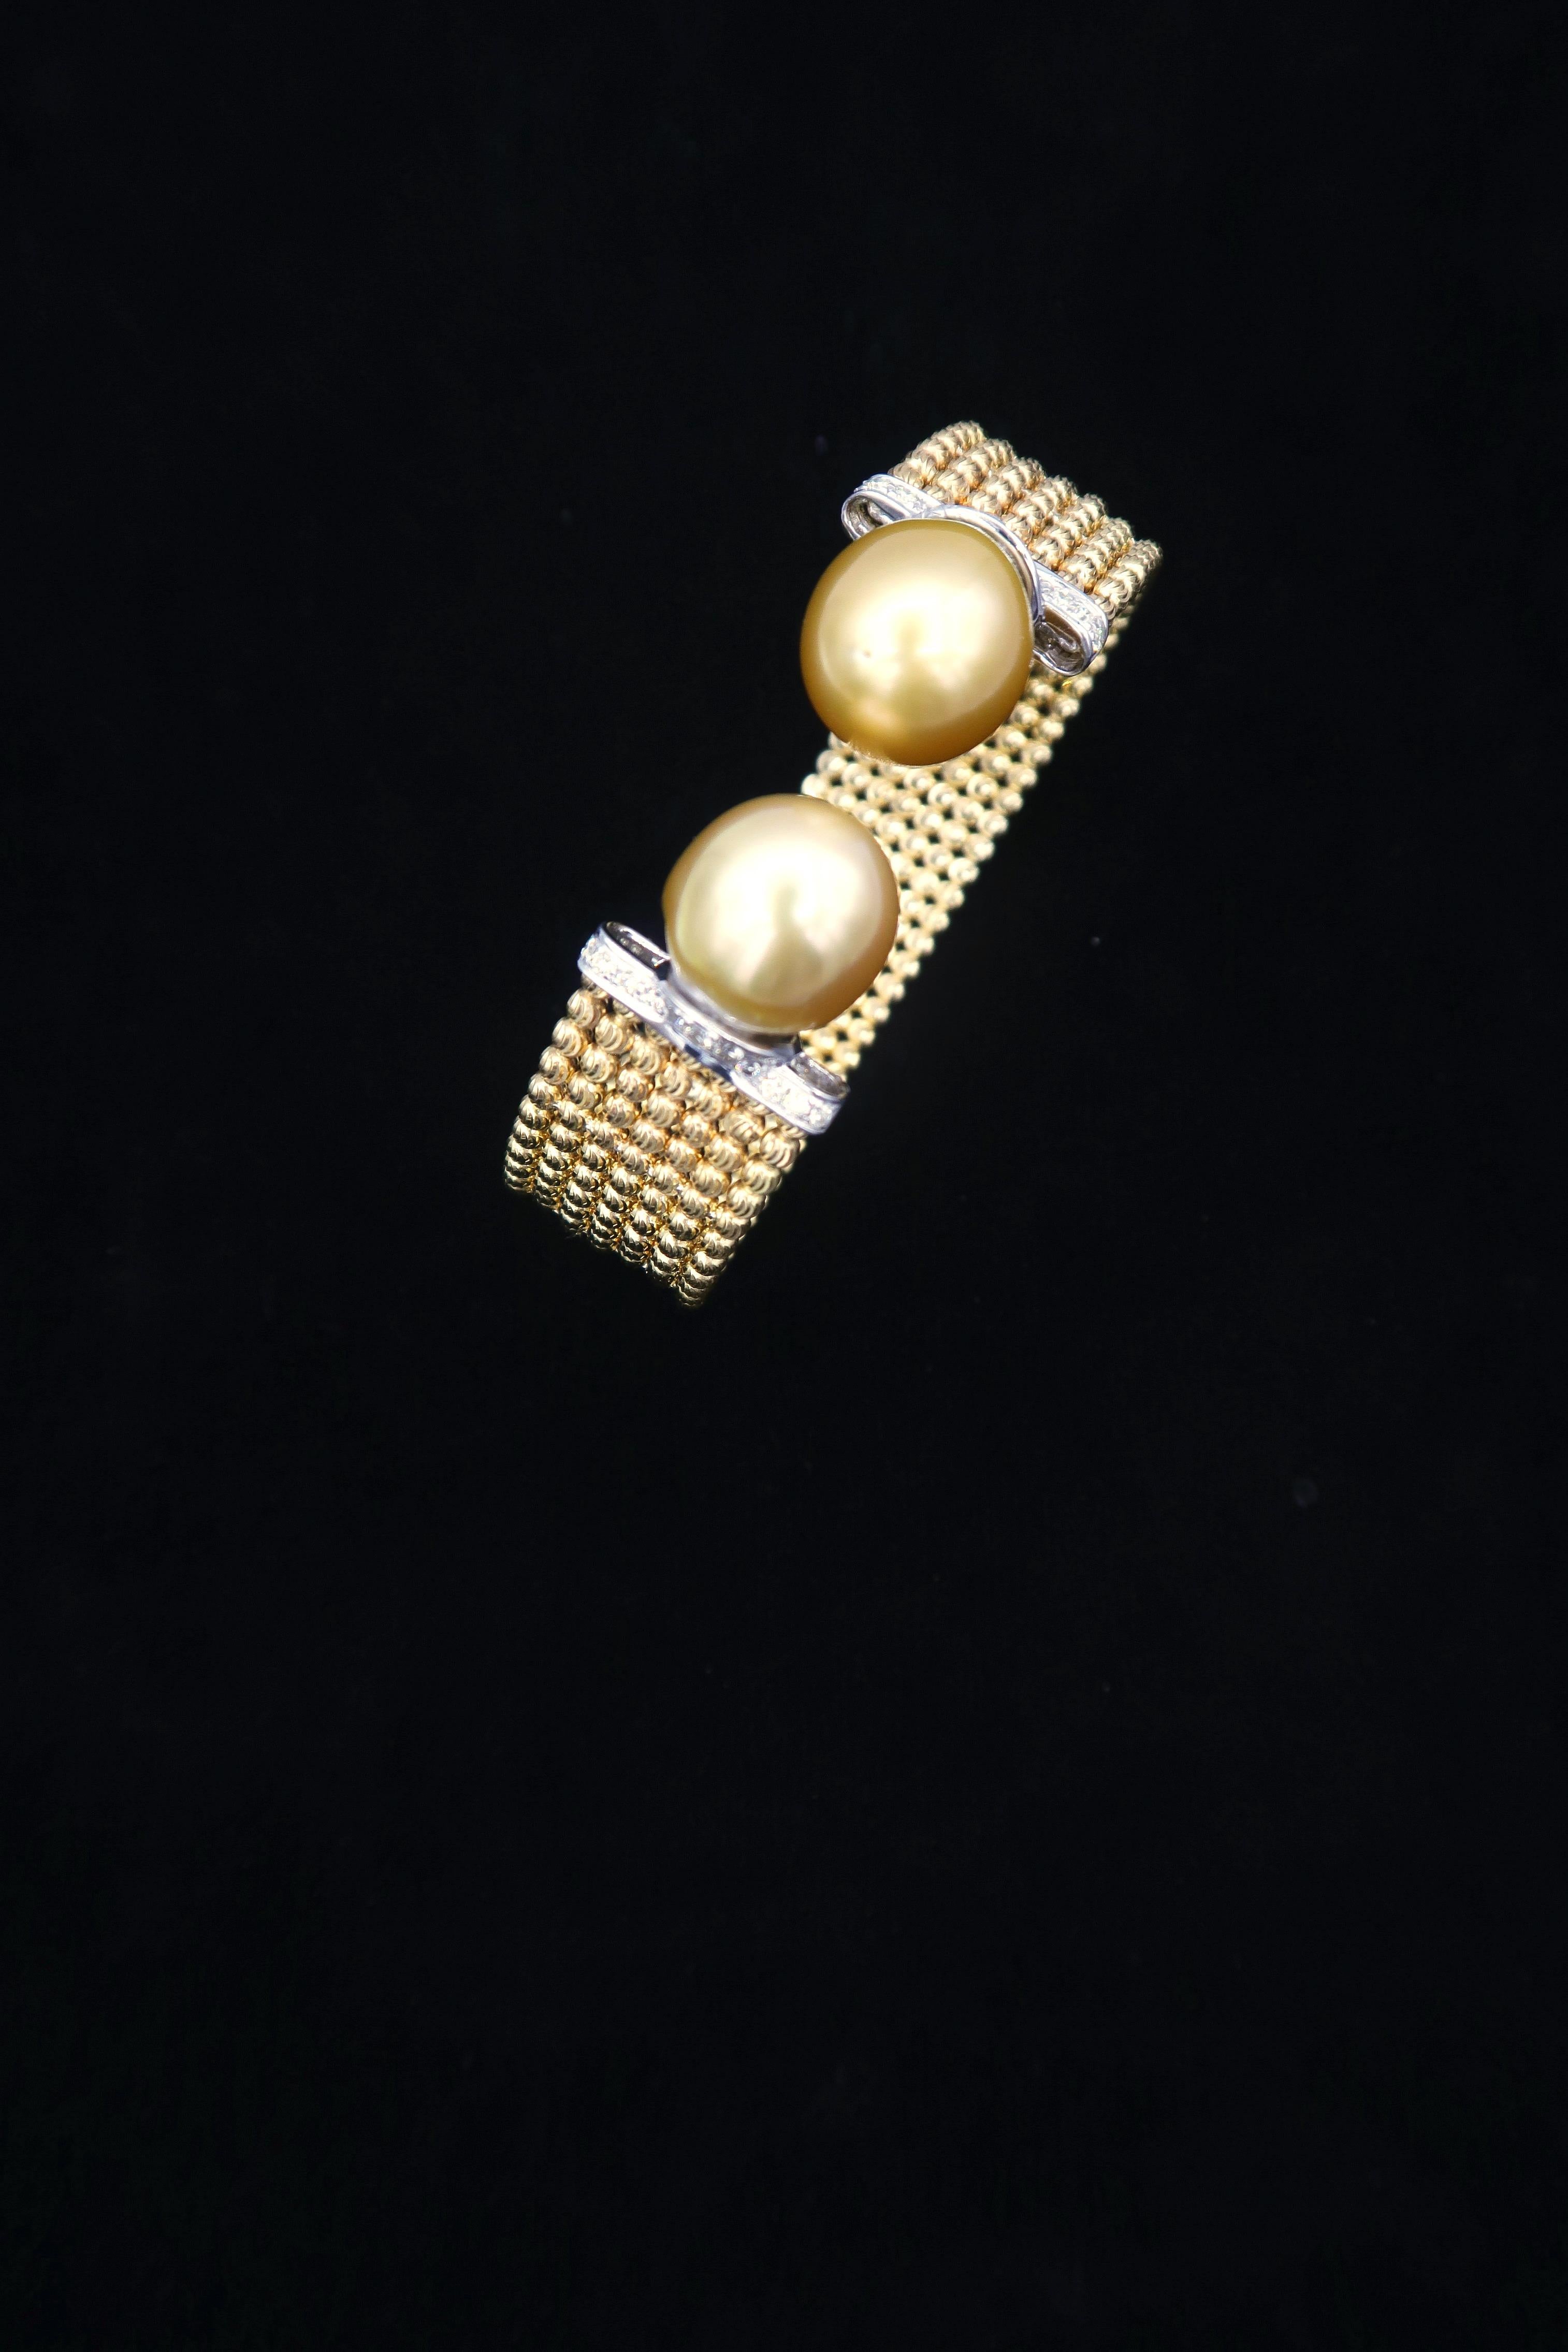 Easy-to-Wear Spring Open Bangle in 18K Gold w/ Diamonds & Gold South Sea Pearls For Sale 2